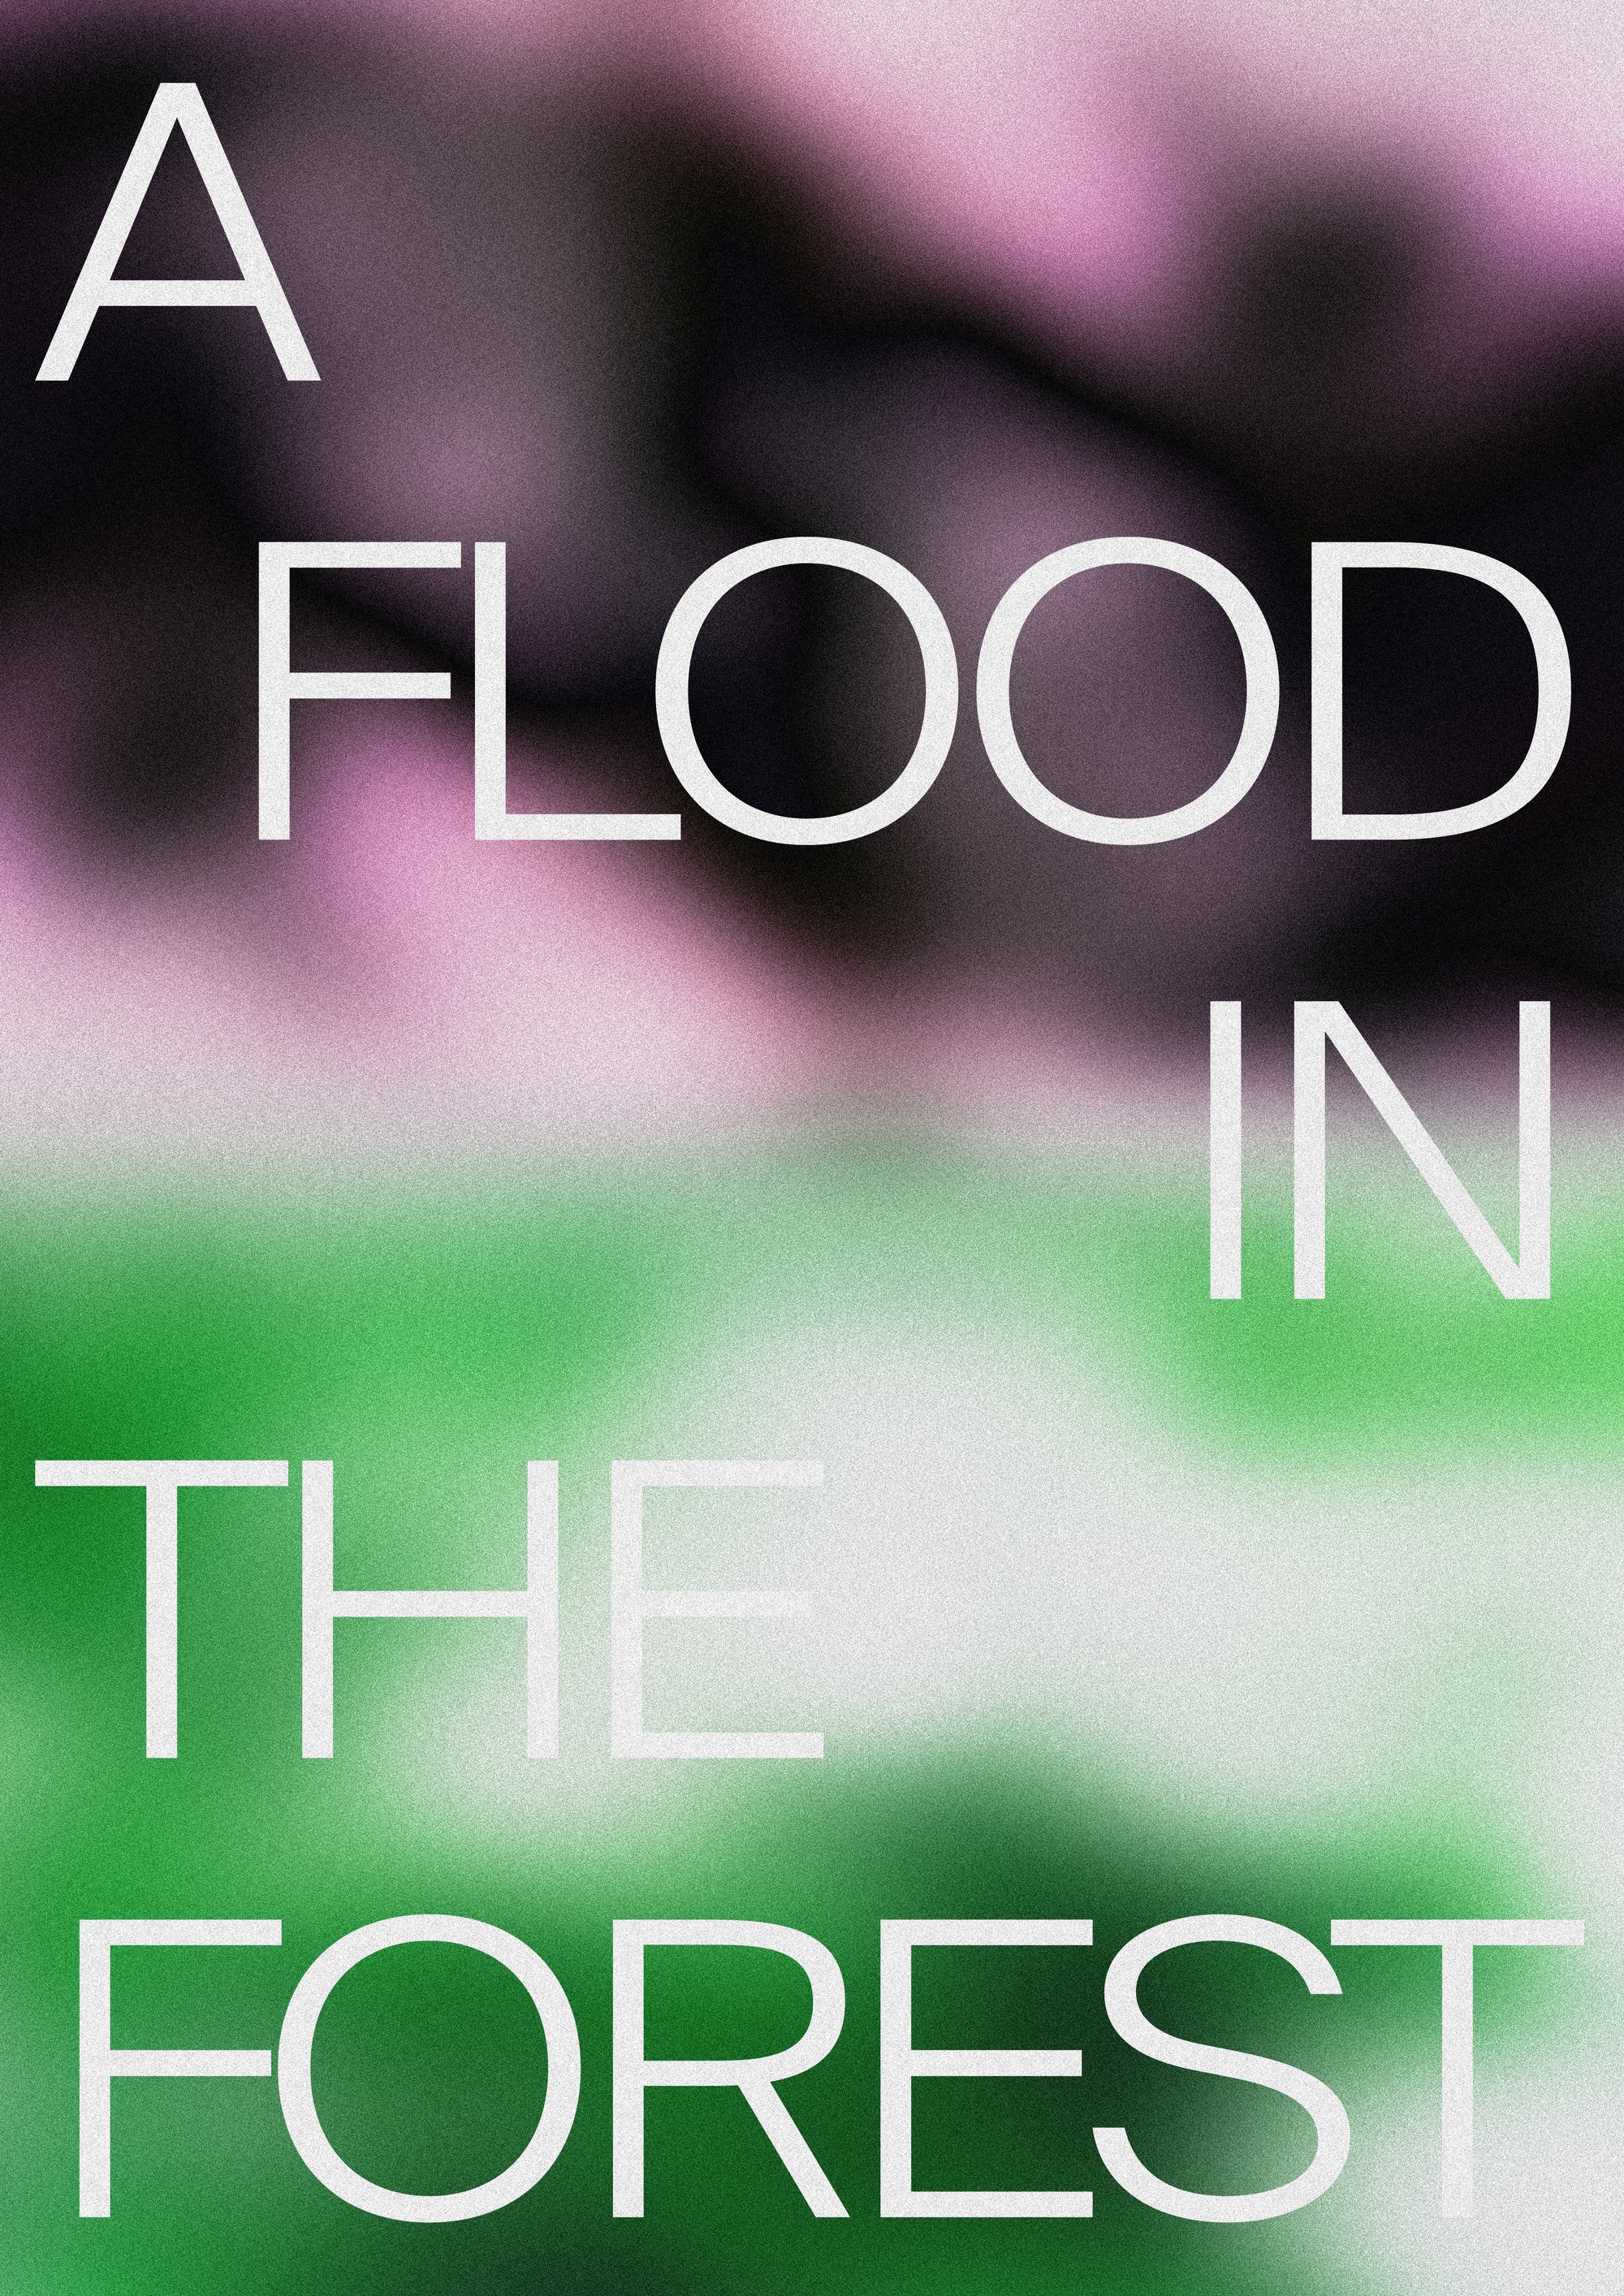 Image of A Flood in the Forest